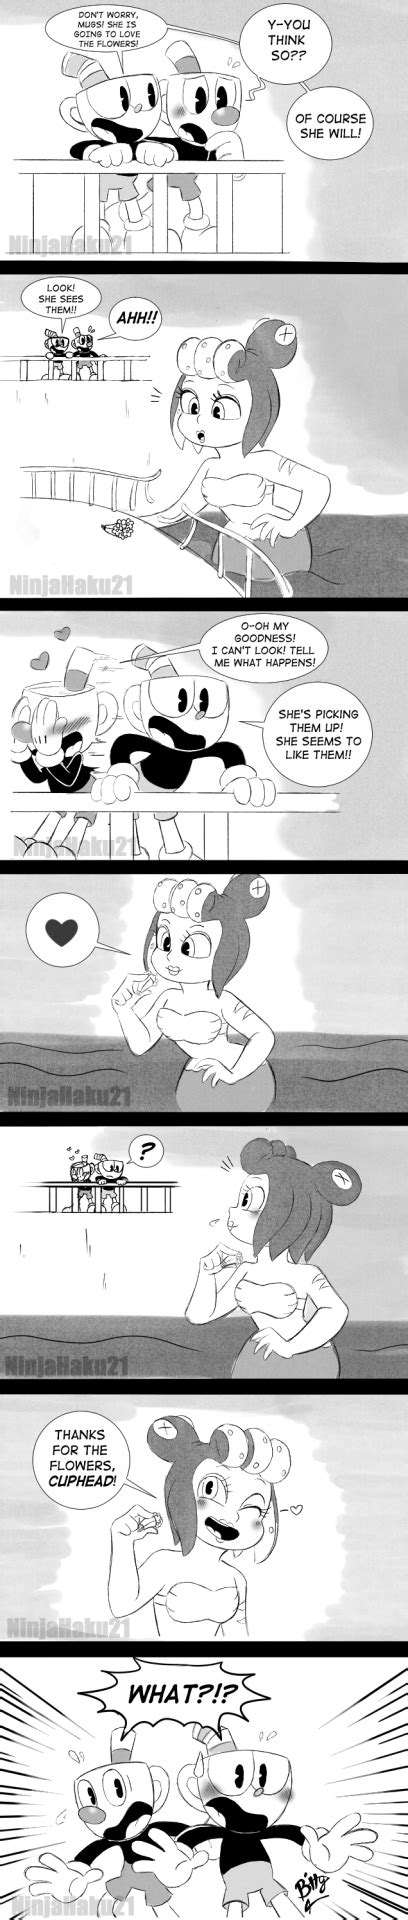 A Cuphead And Mugman Comic Featuring Cala Maria My Sister And I Thought Of This Silly Idea